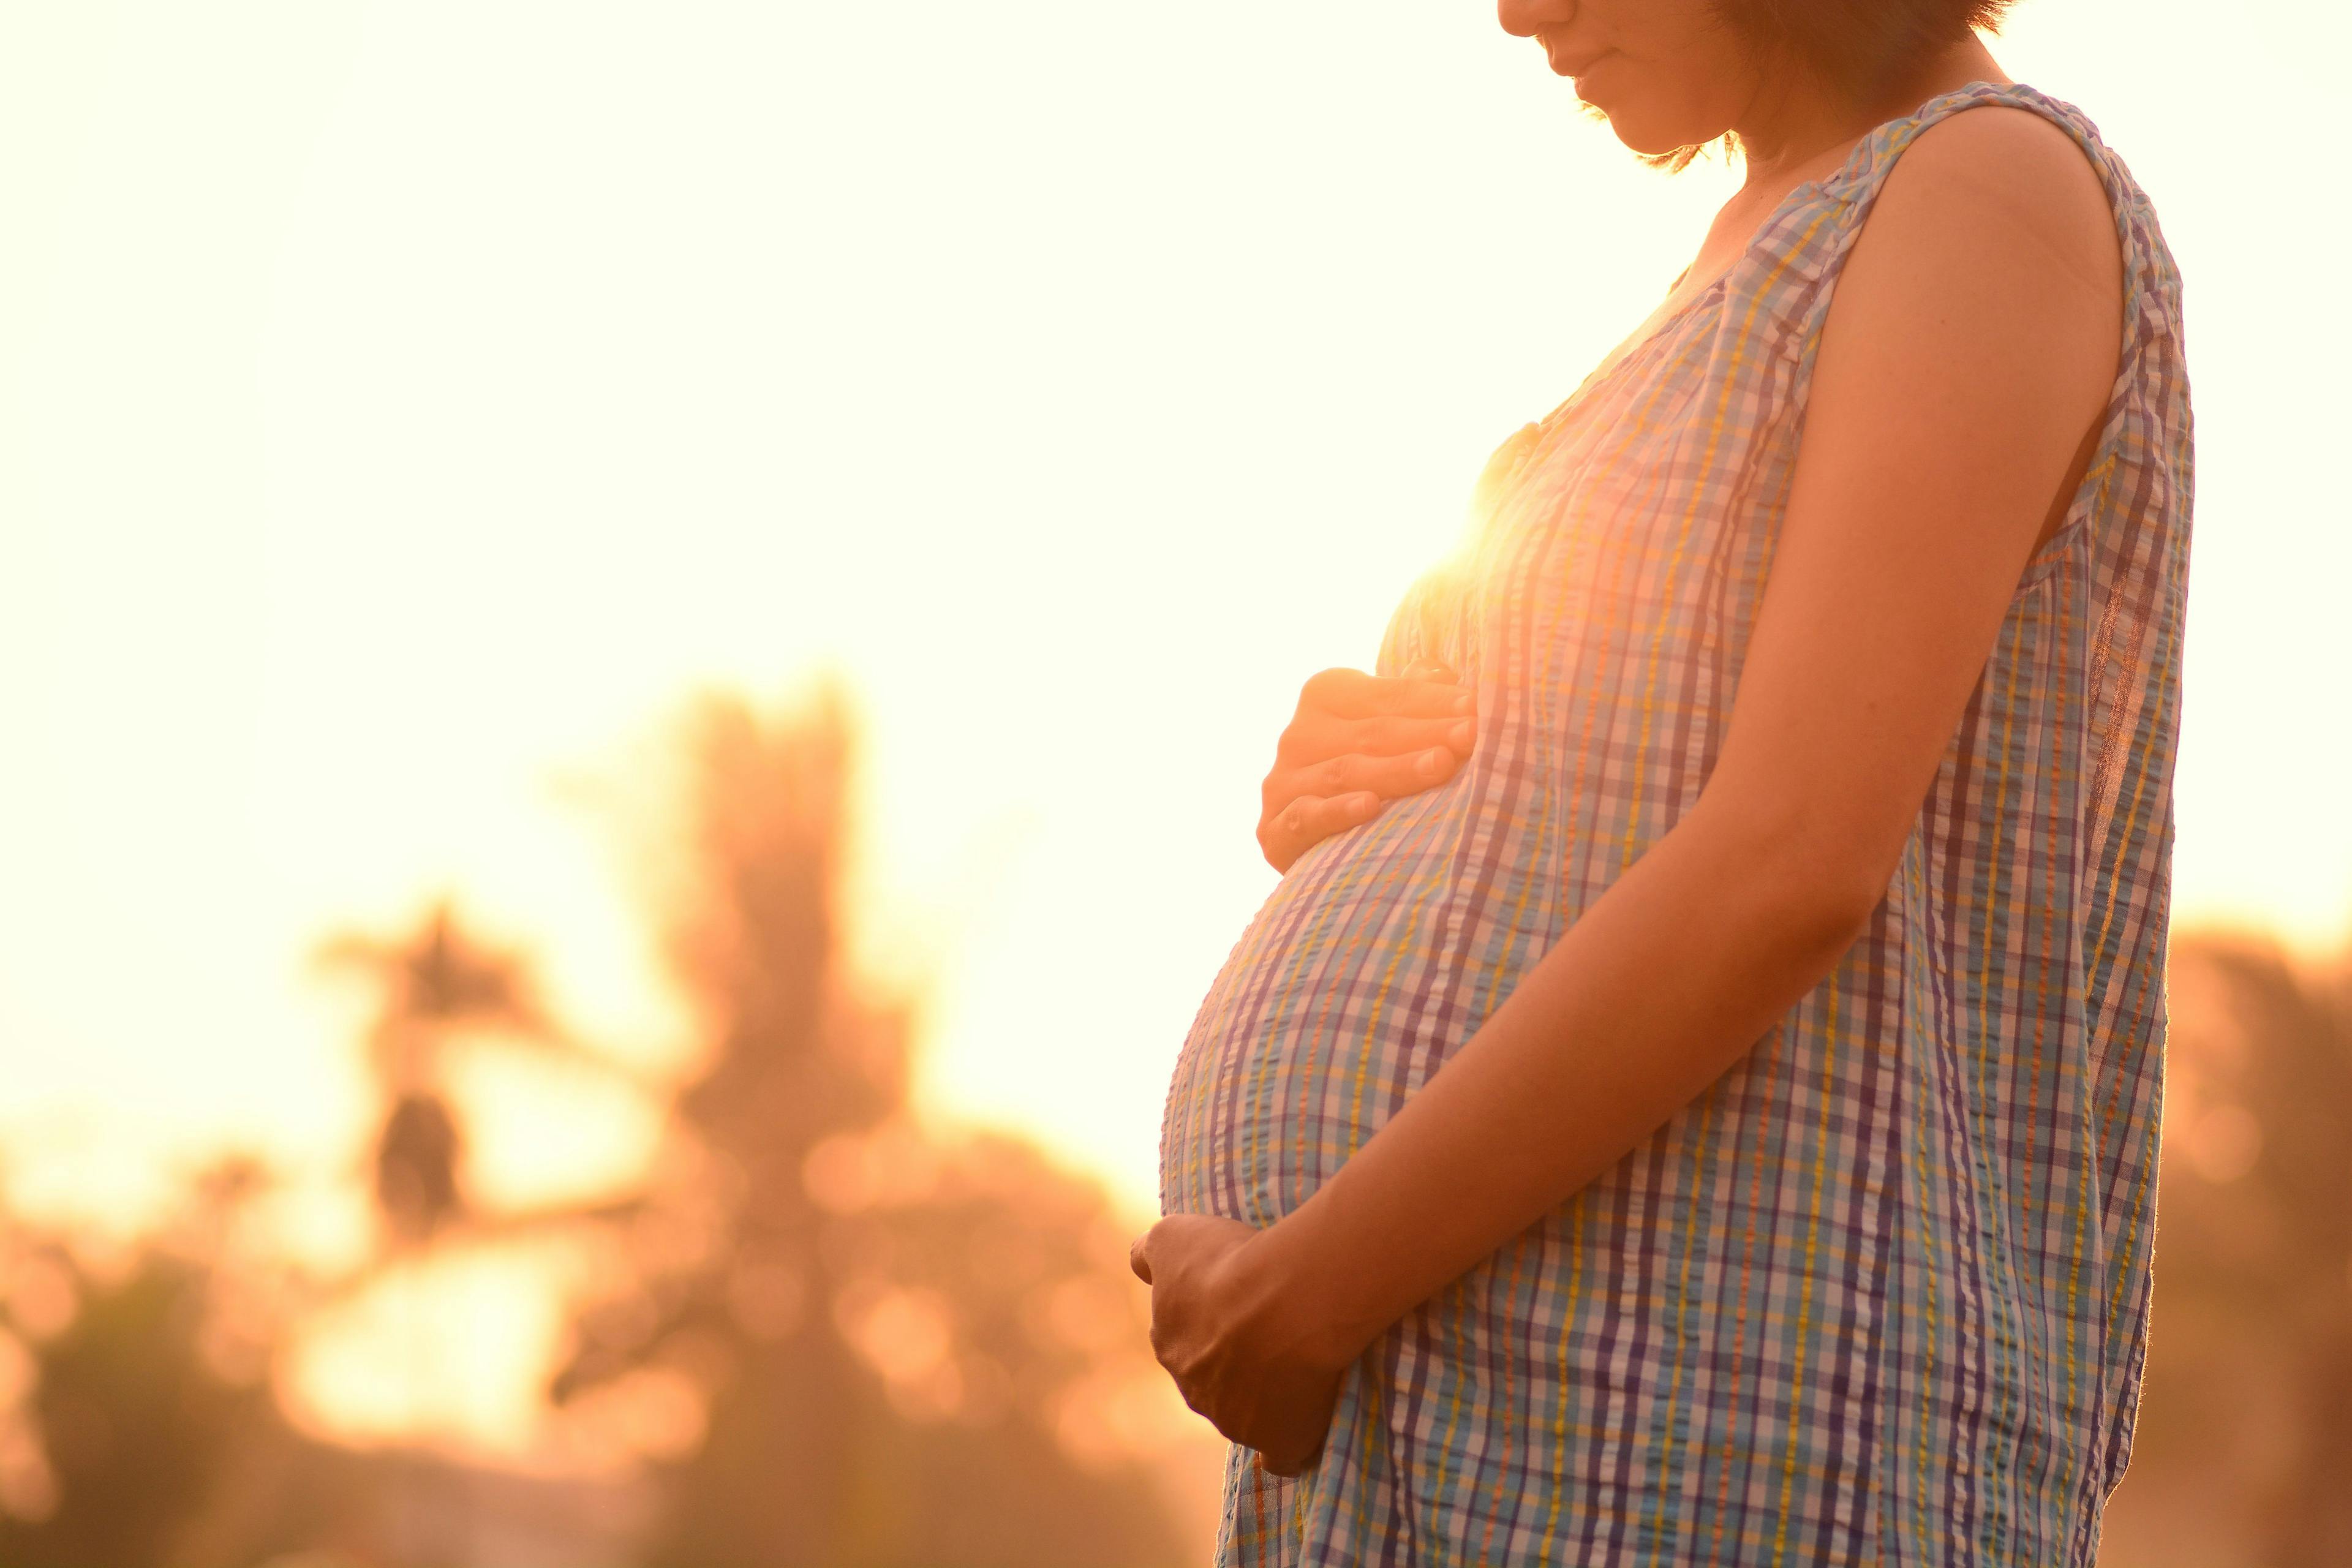 Long-term mortality risks for women with adverse pregnancy outcomes | Image Credit: © rudisetiawan - © rudisetiawan - stock.adobe.com.